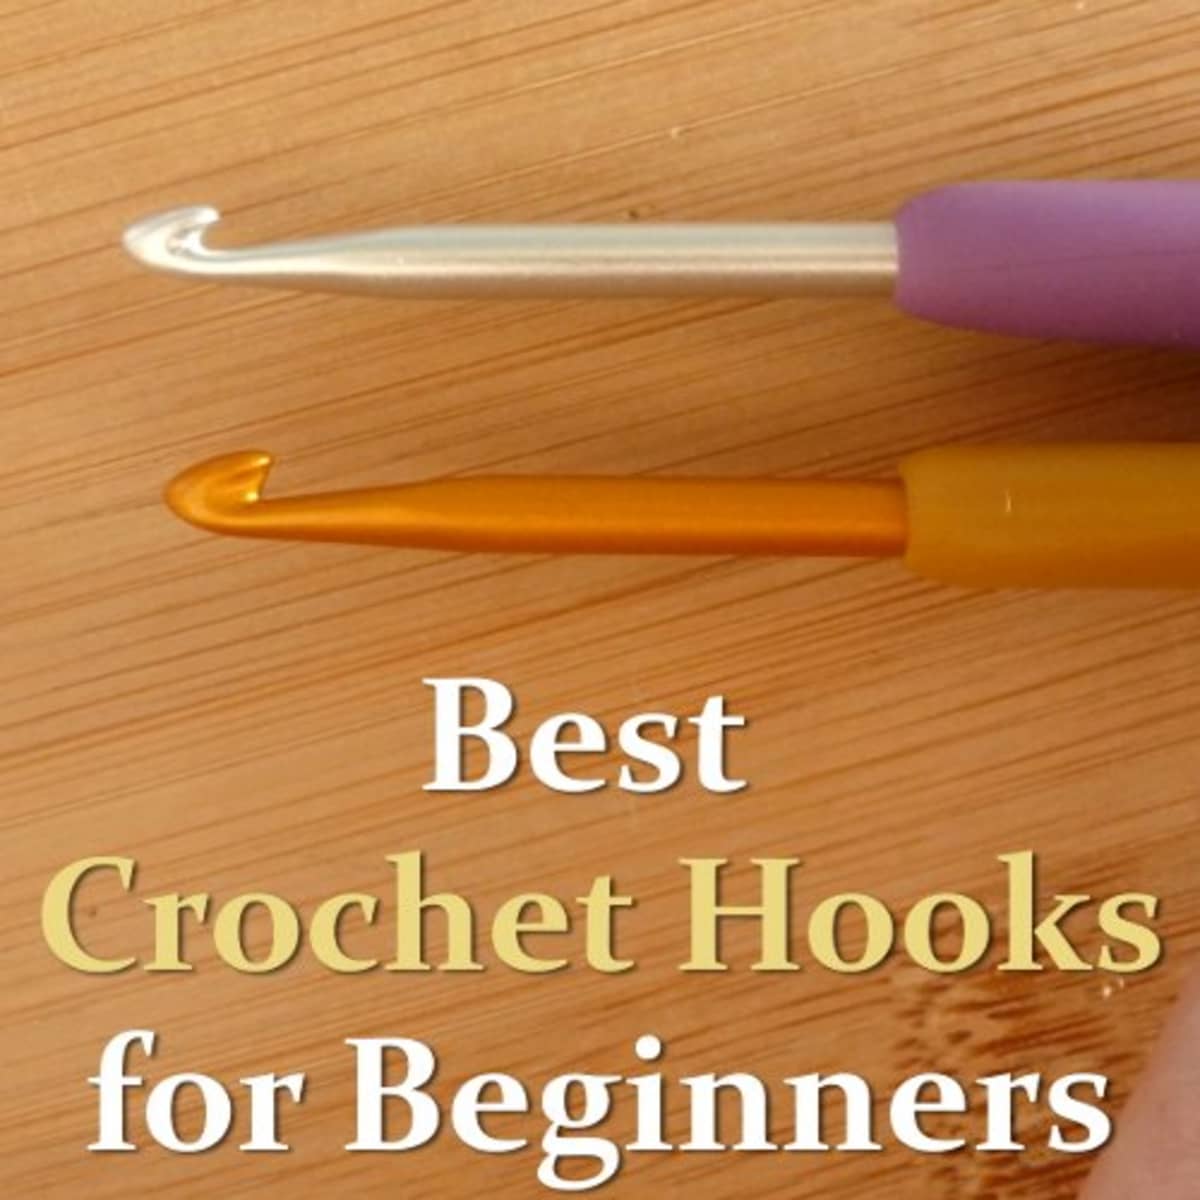 What are the best type of crocheting hooks for a beginner? - Quora